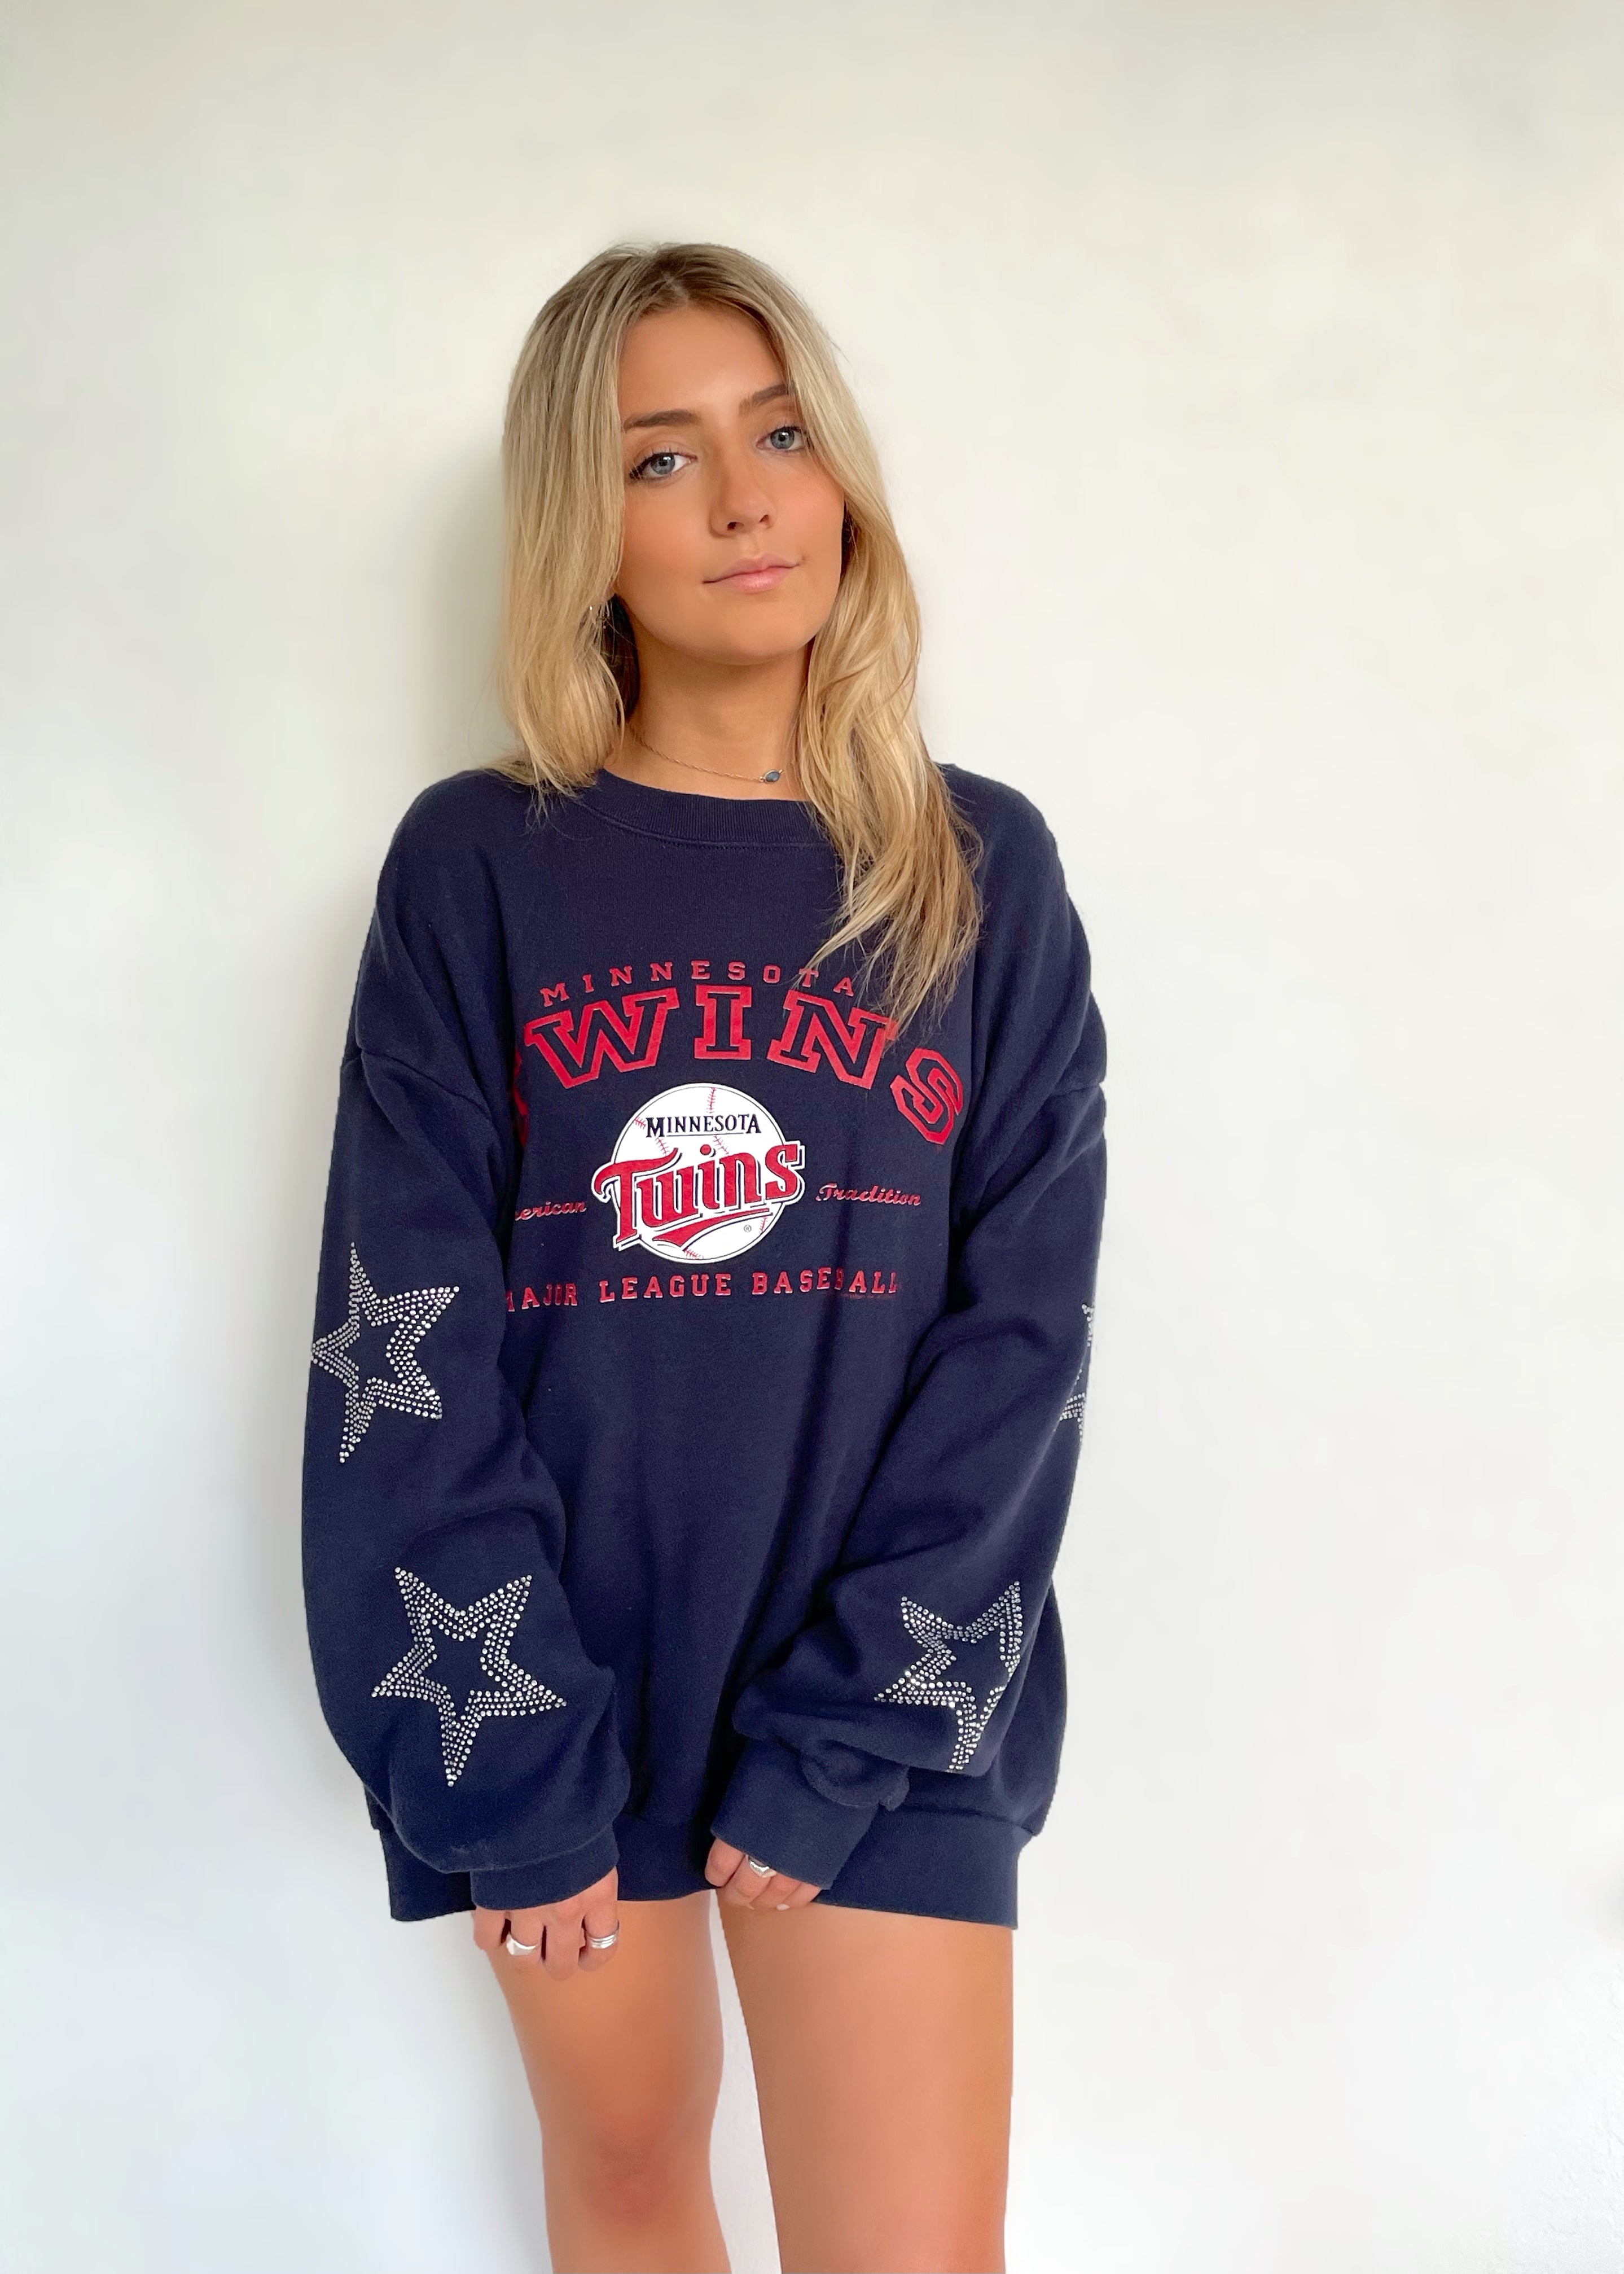 ShopCrystalRags Golden State Warriors, NBA One of A Kind Vintage Cropped Sweatshirt with Crystal Star Design